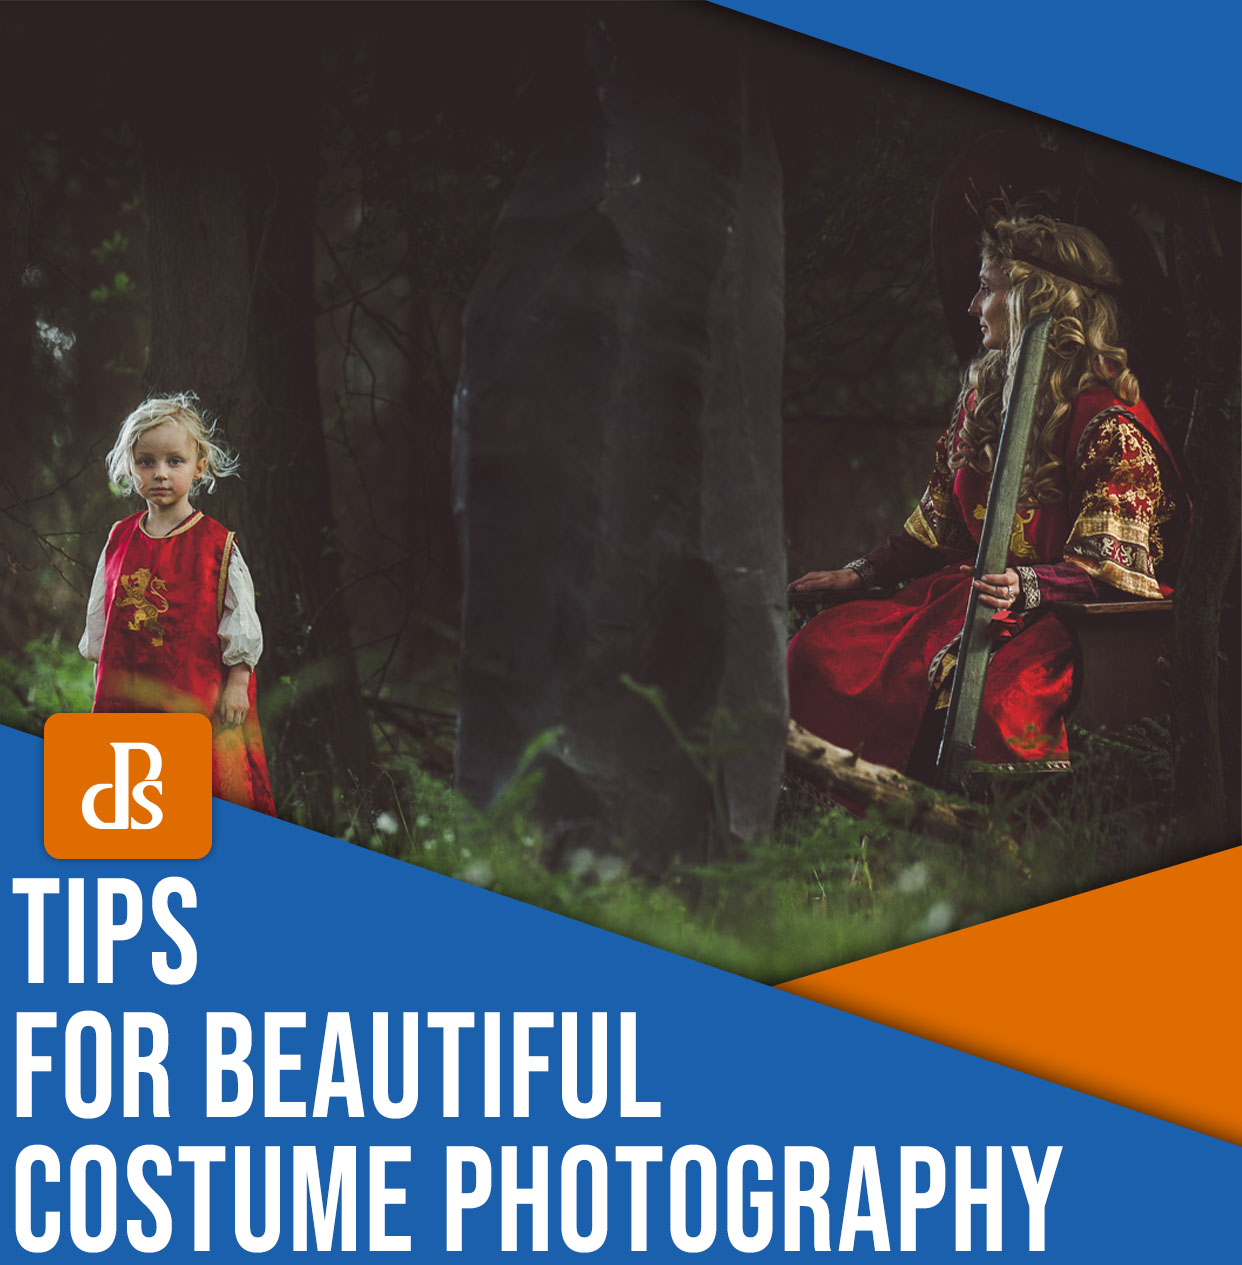 Tips for beautiful costume photography